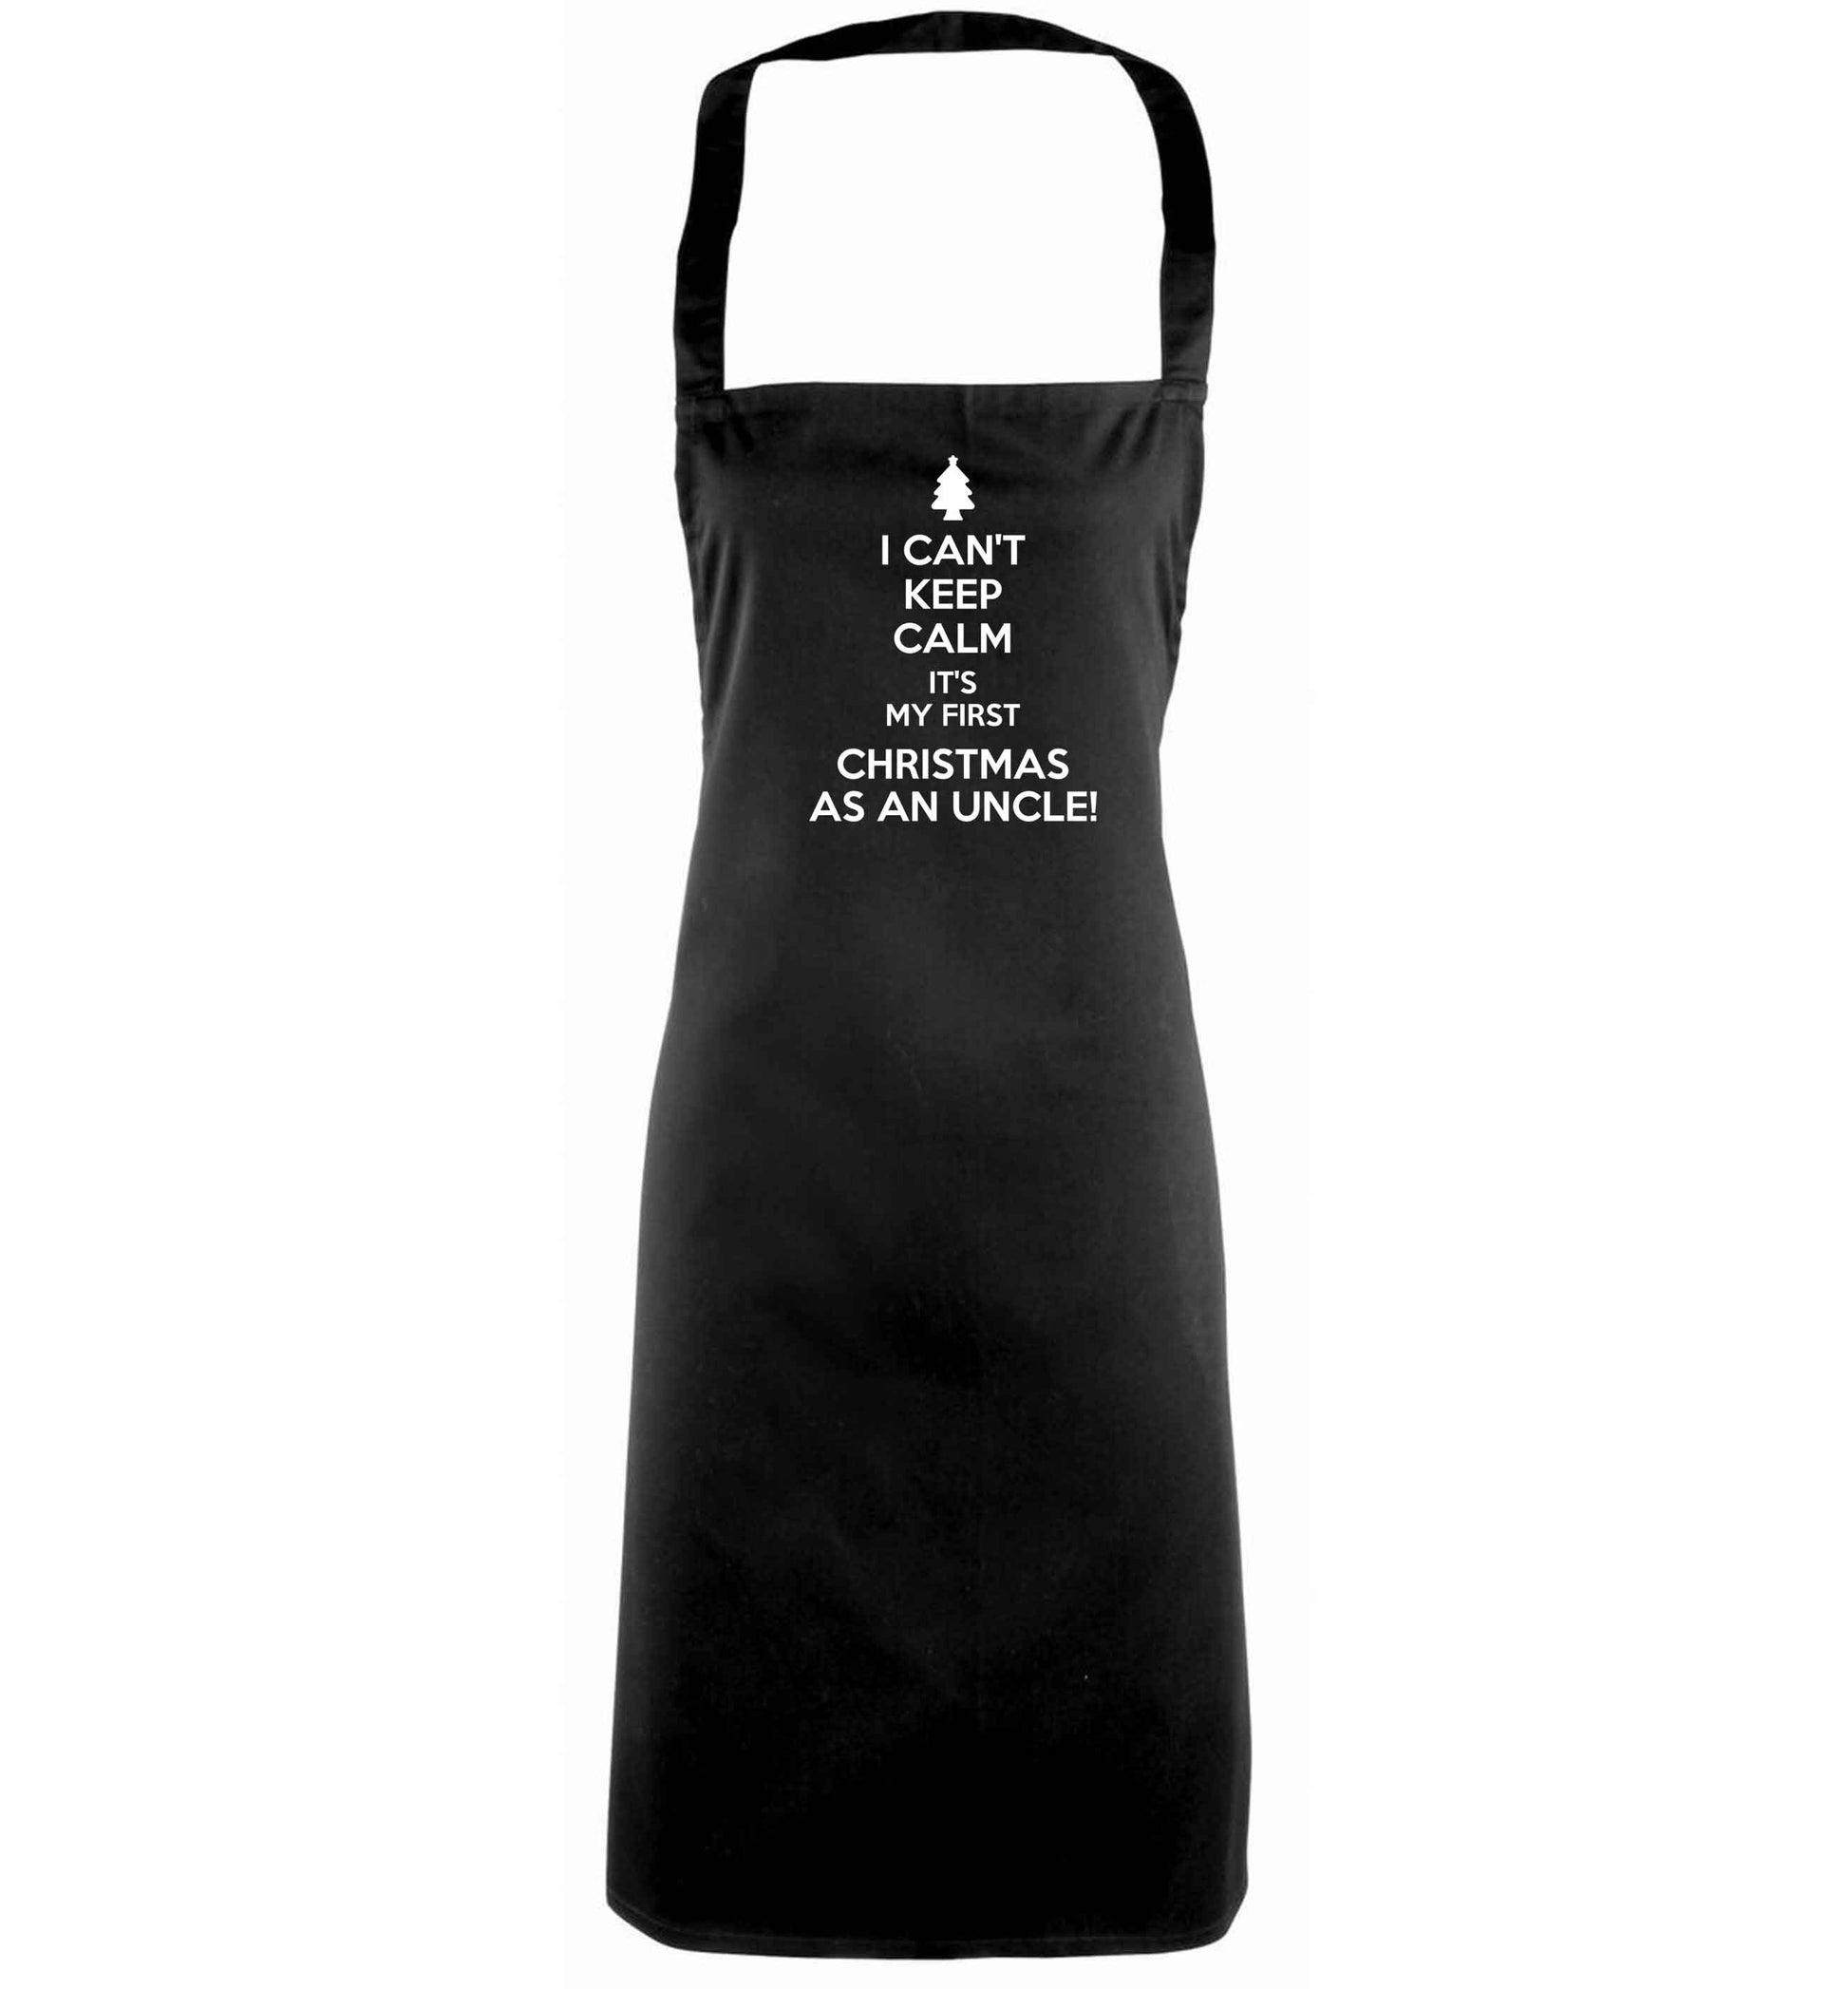 I can't keep calm it's my first Christmas as an uncle! black apron